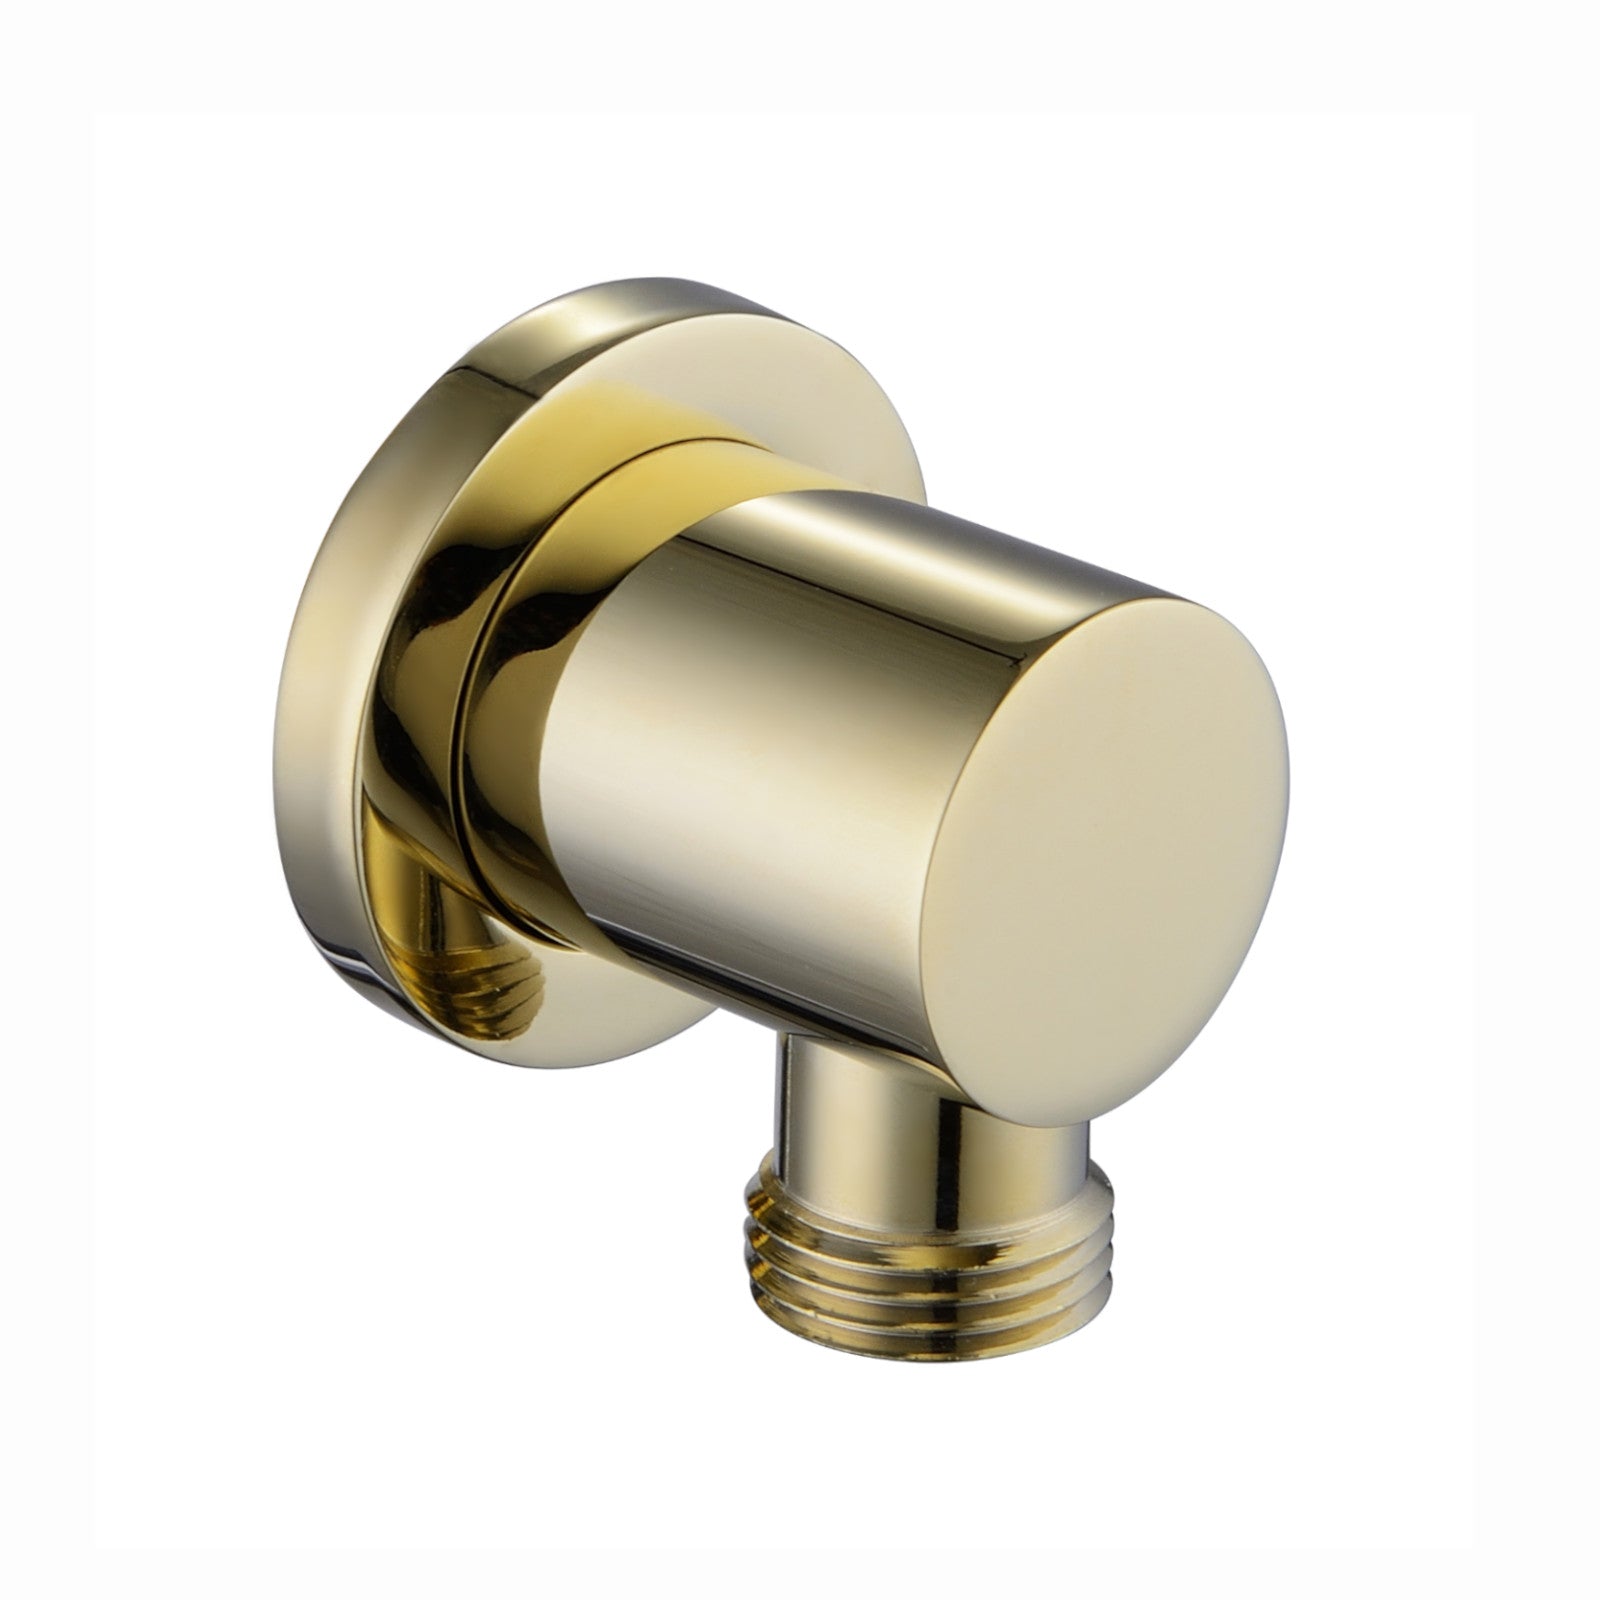 Round shower outlet elbow solid brass - English gold - Showers